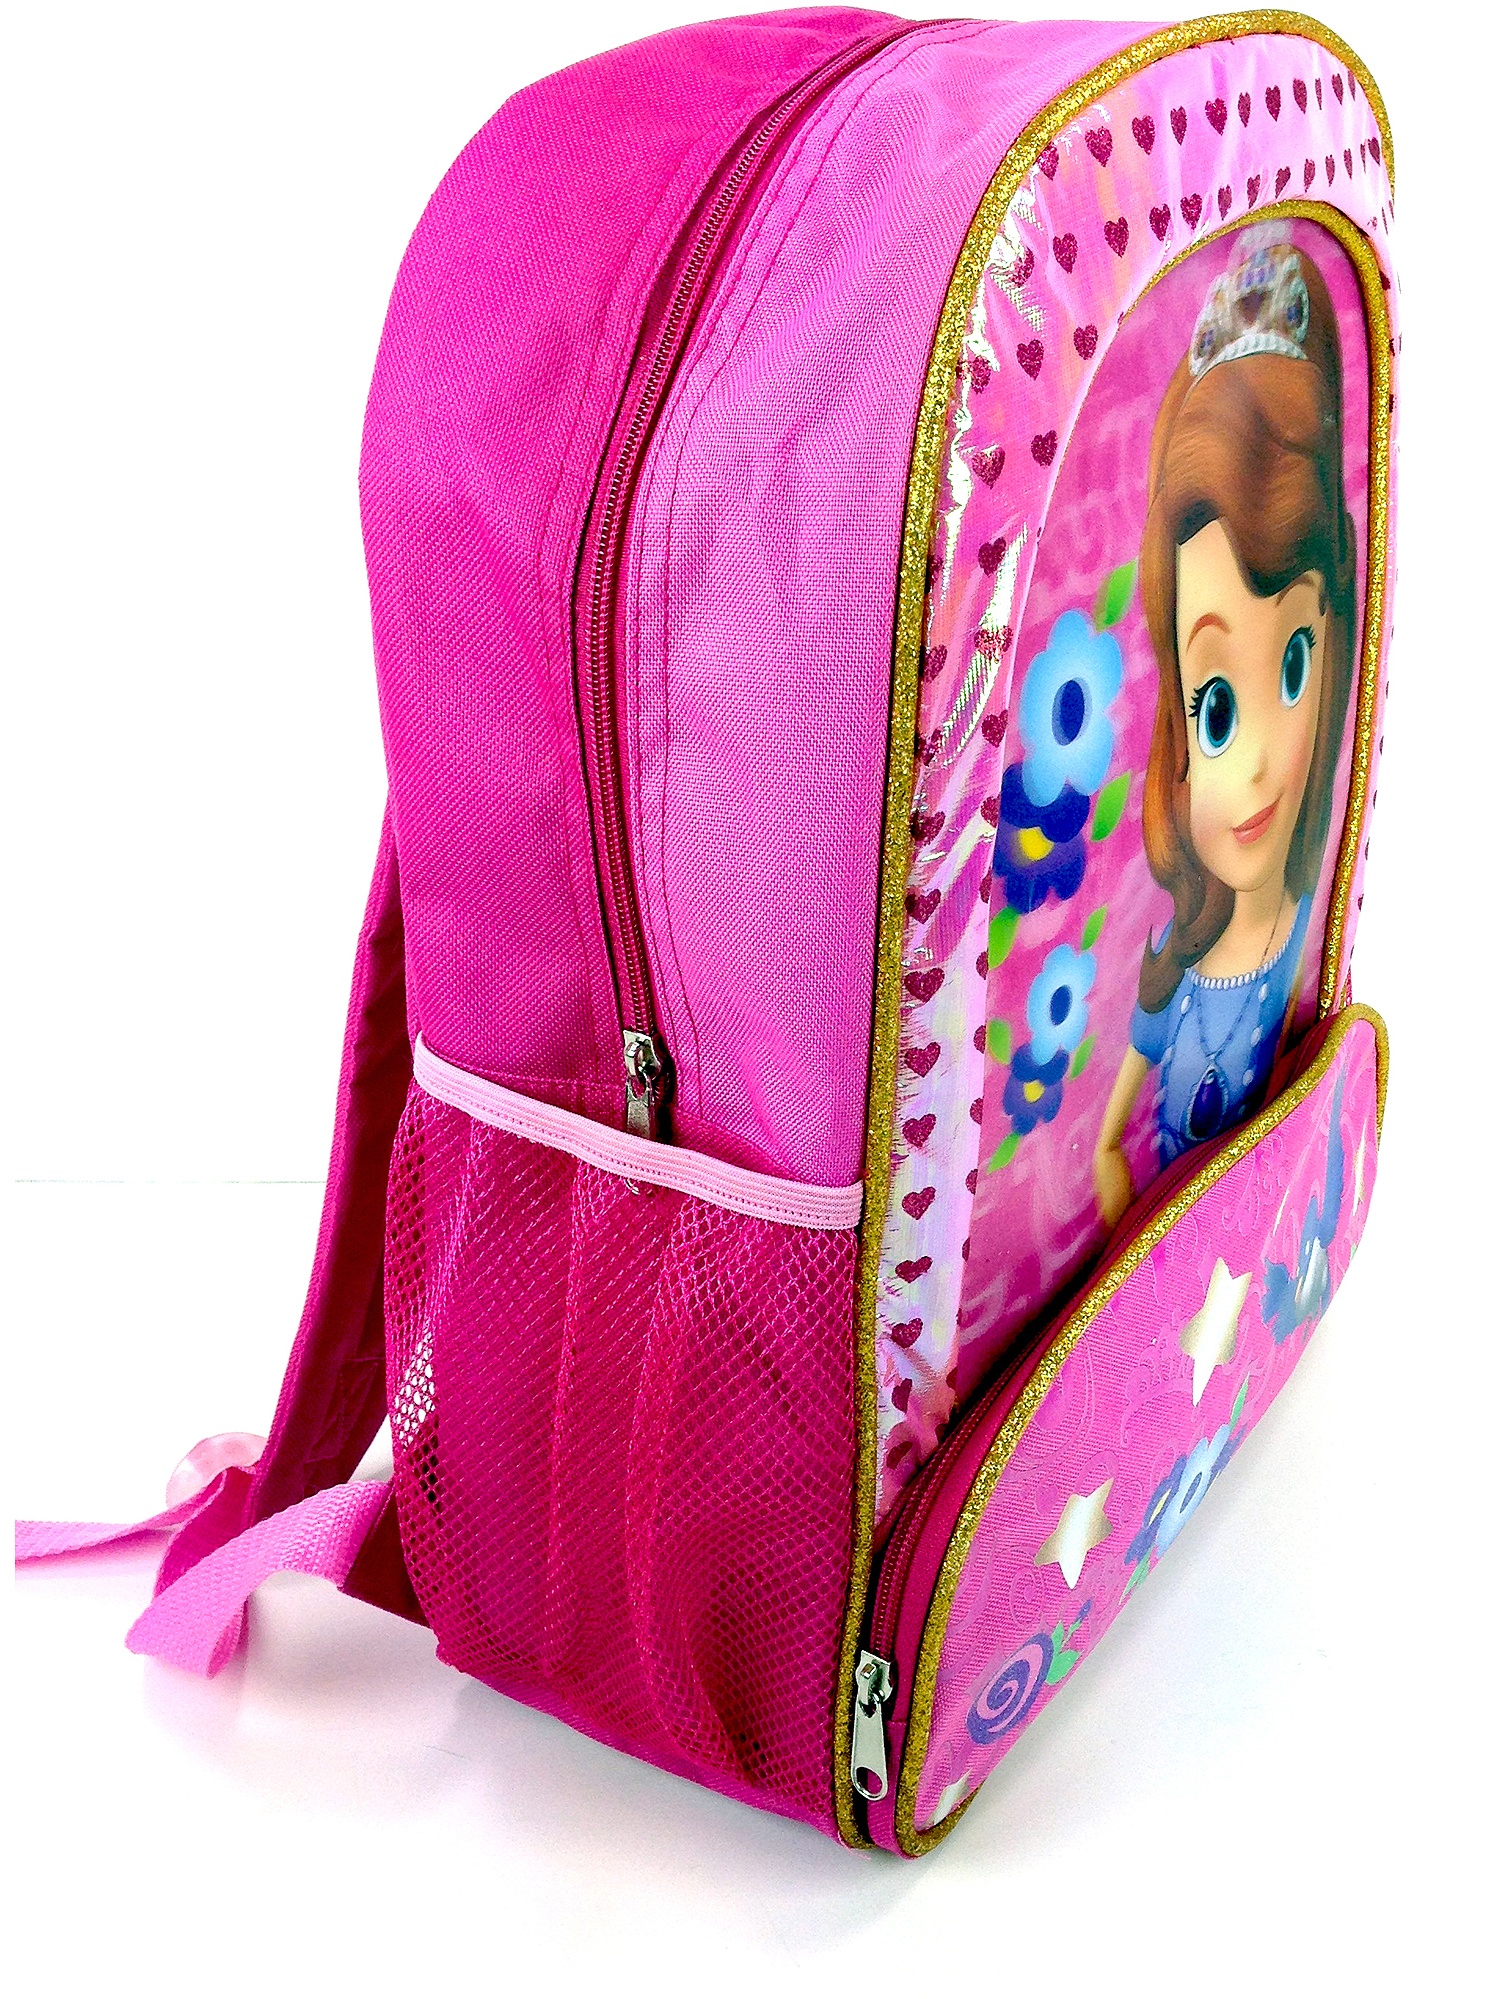 Disney Sofia The First 16" Girls' Pink Backpack - image 3 of 3